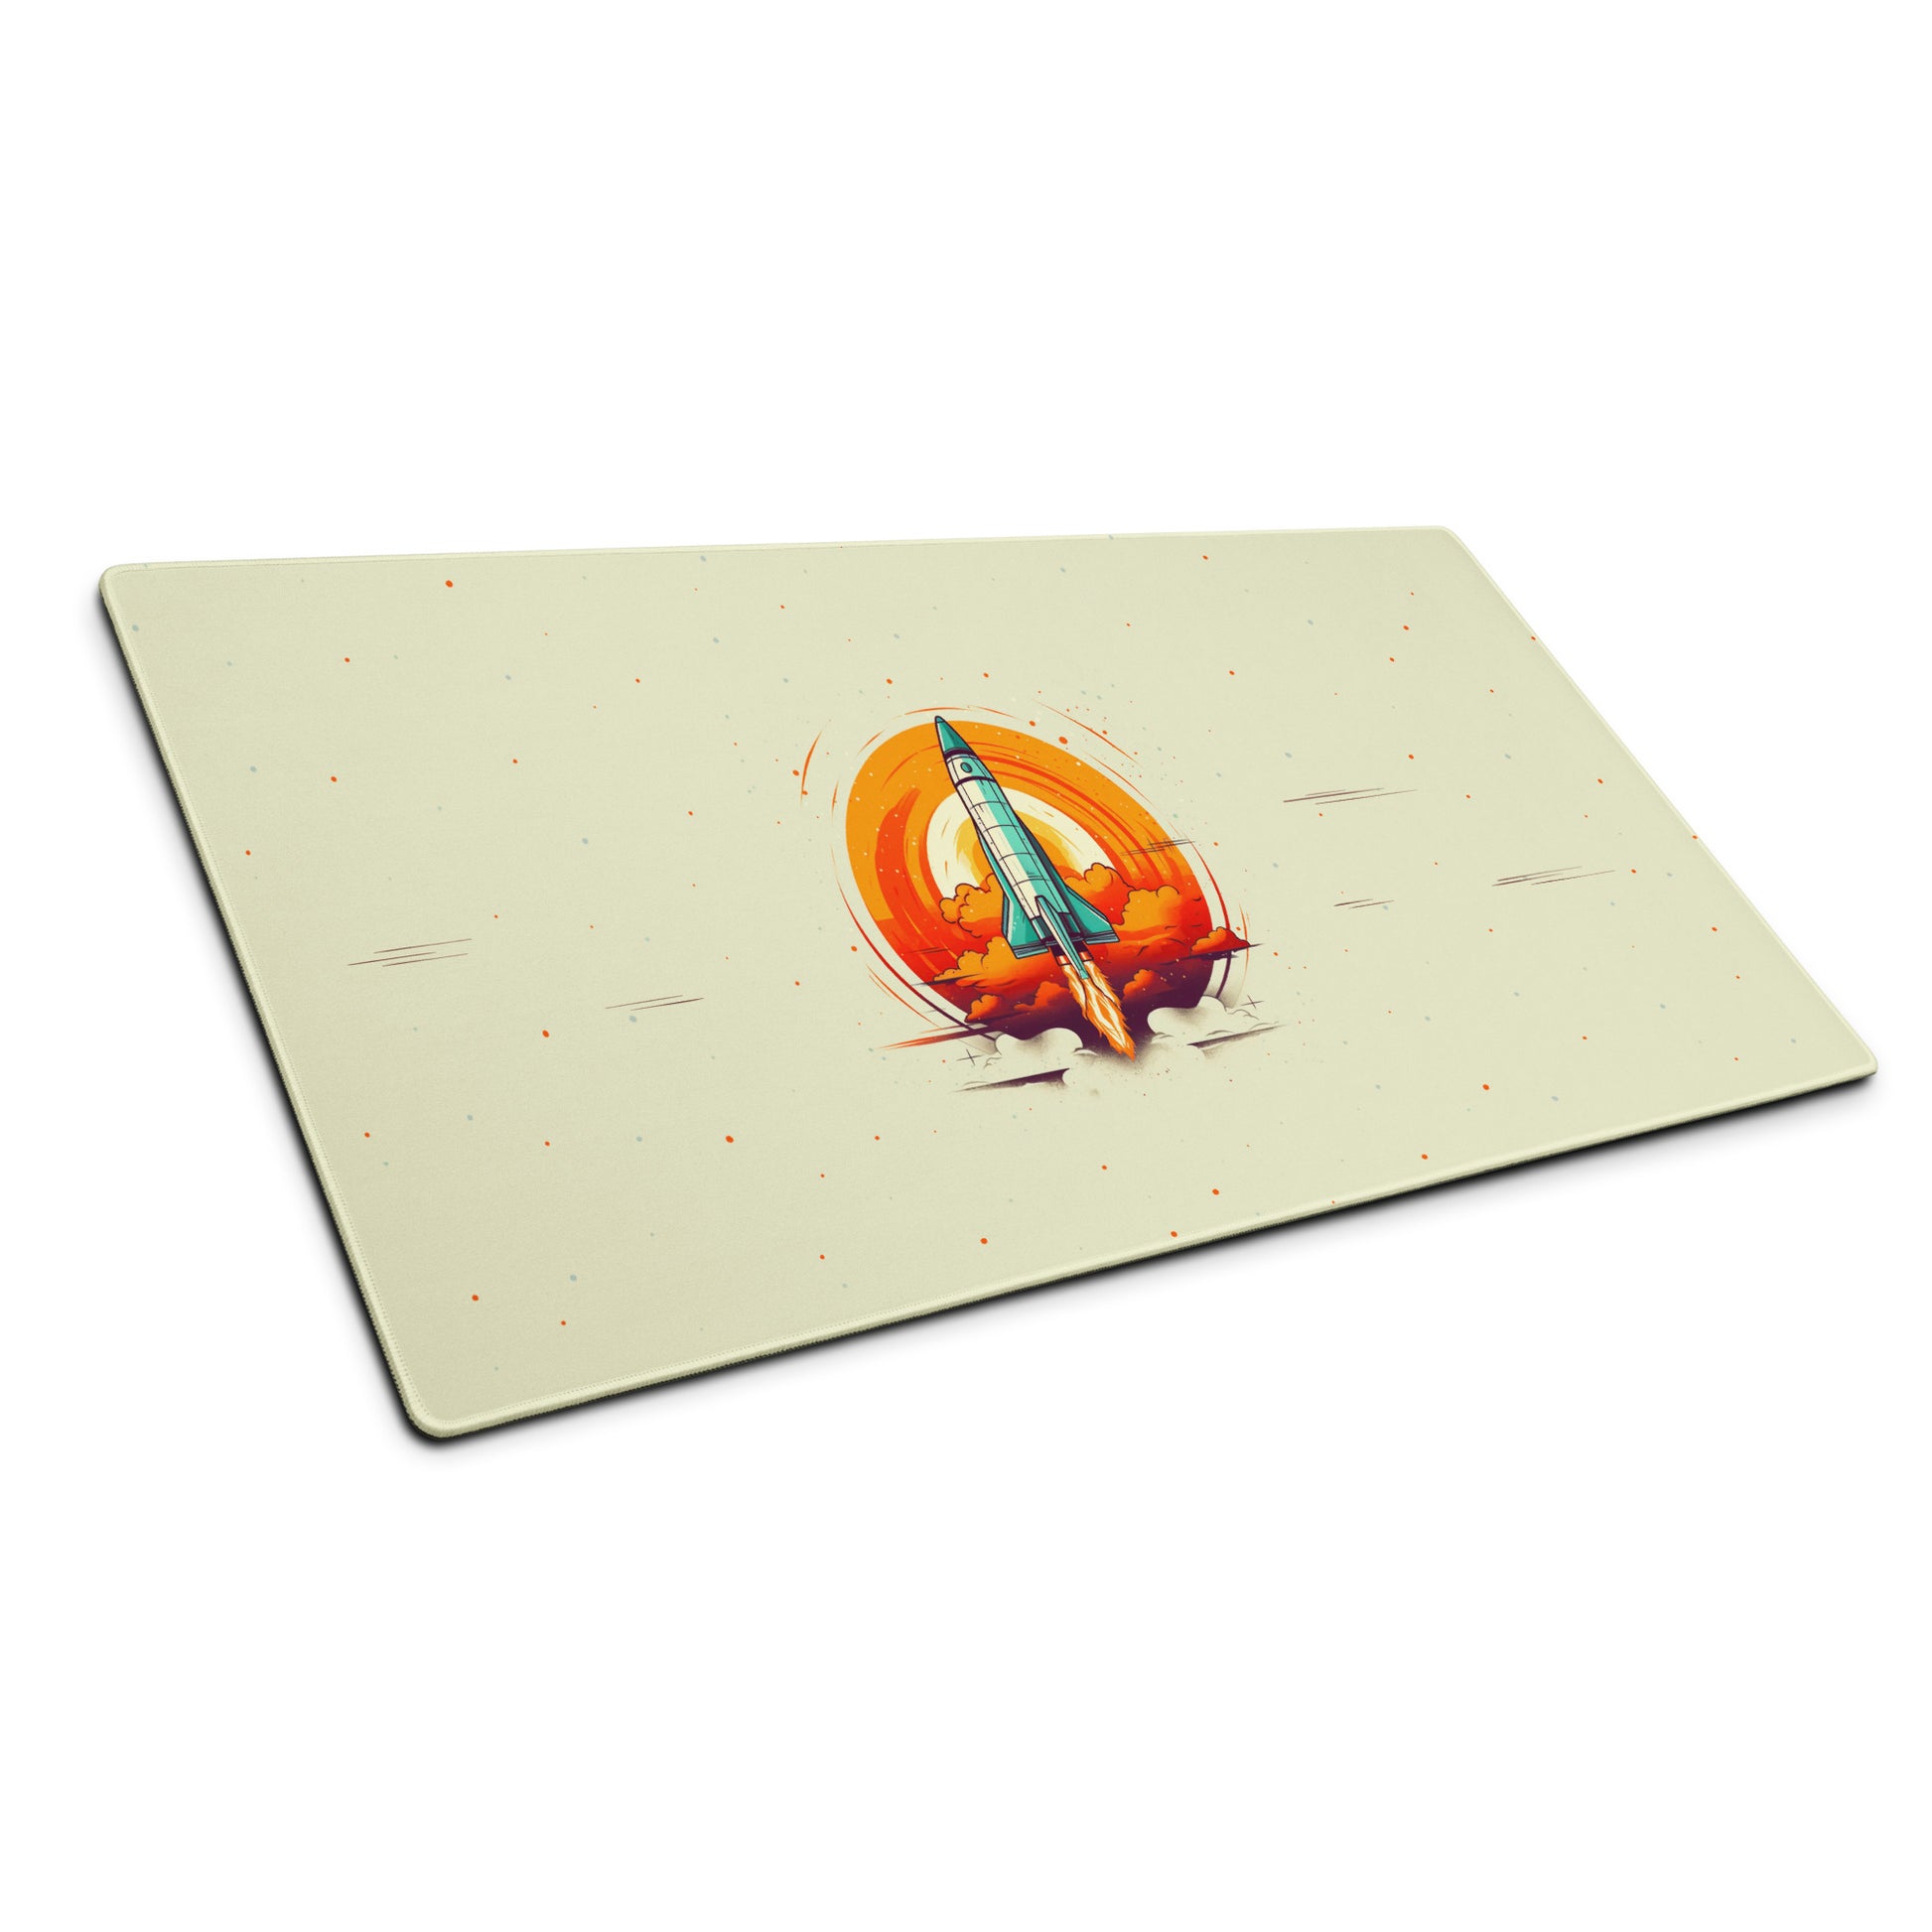 A 36" x 18" desk pad with a space shuttle blasting off sitting at an angle. Beige in color.